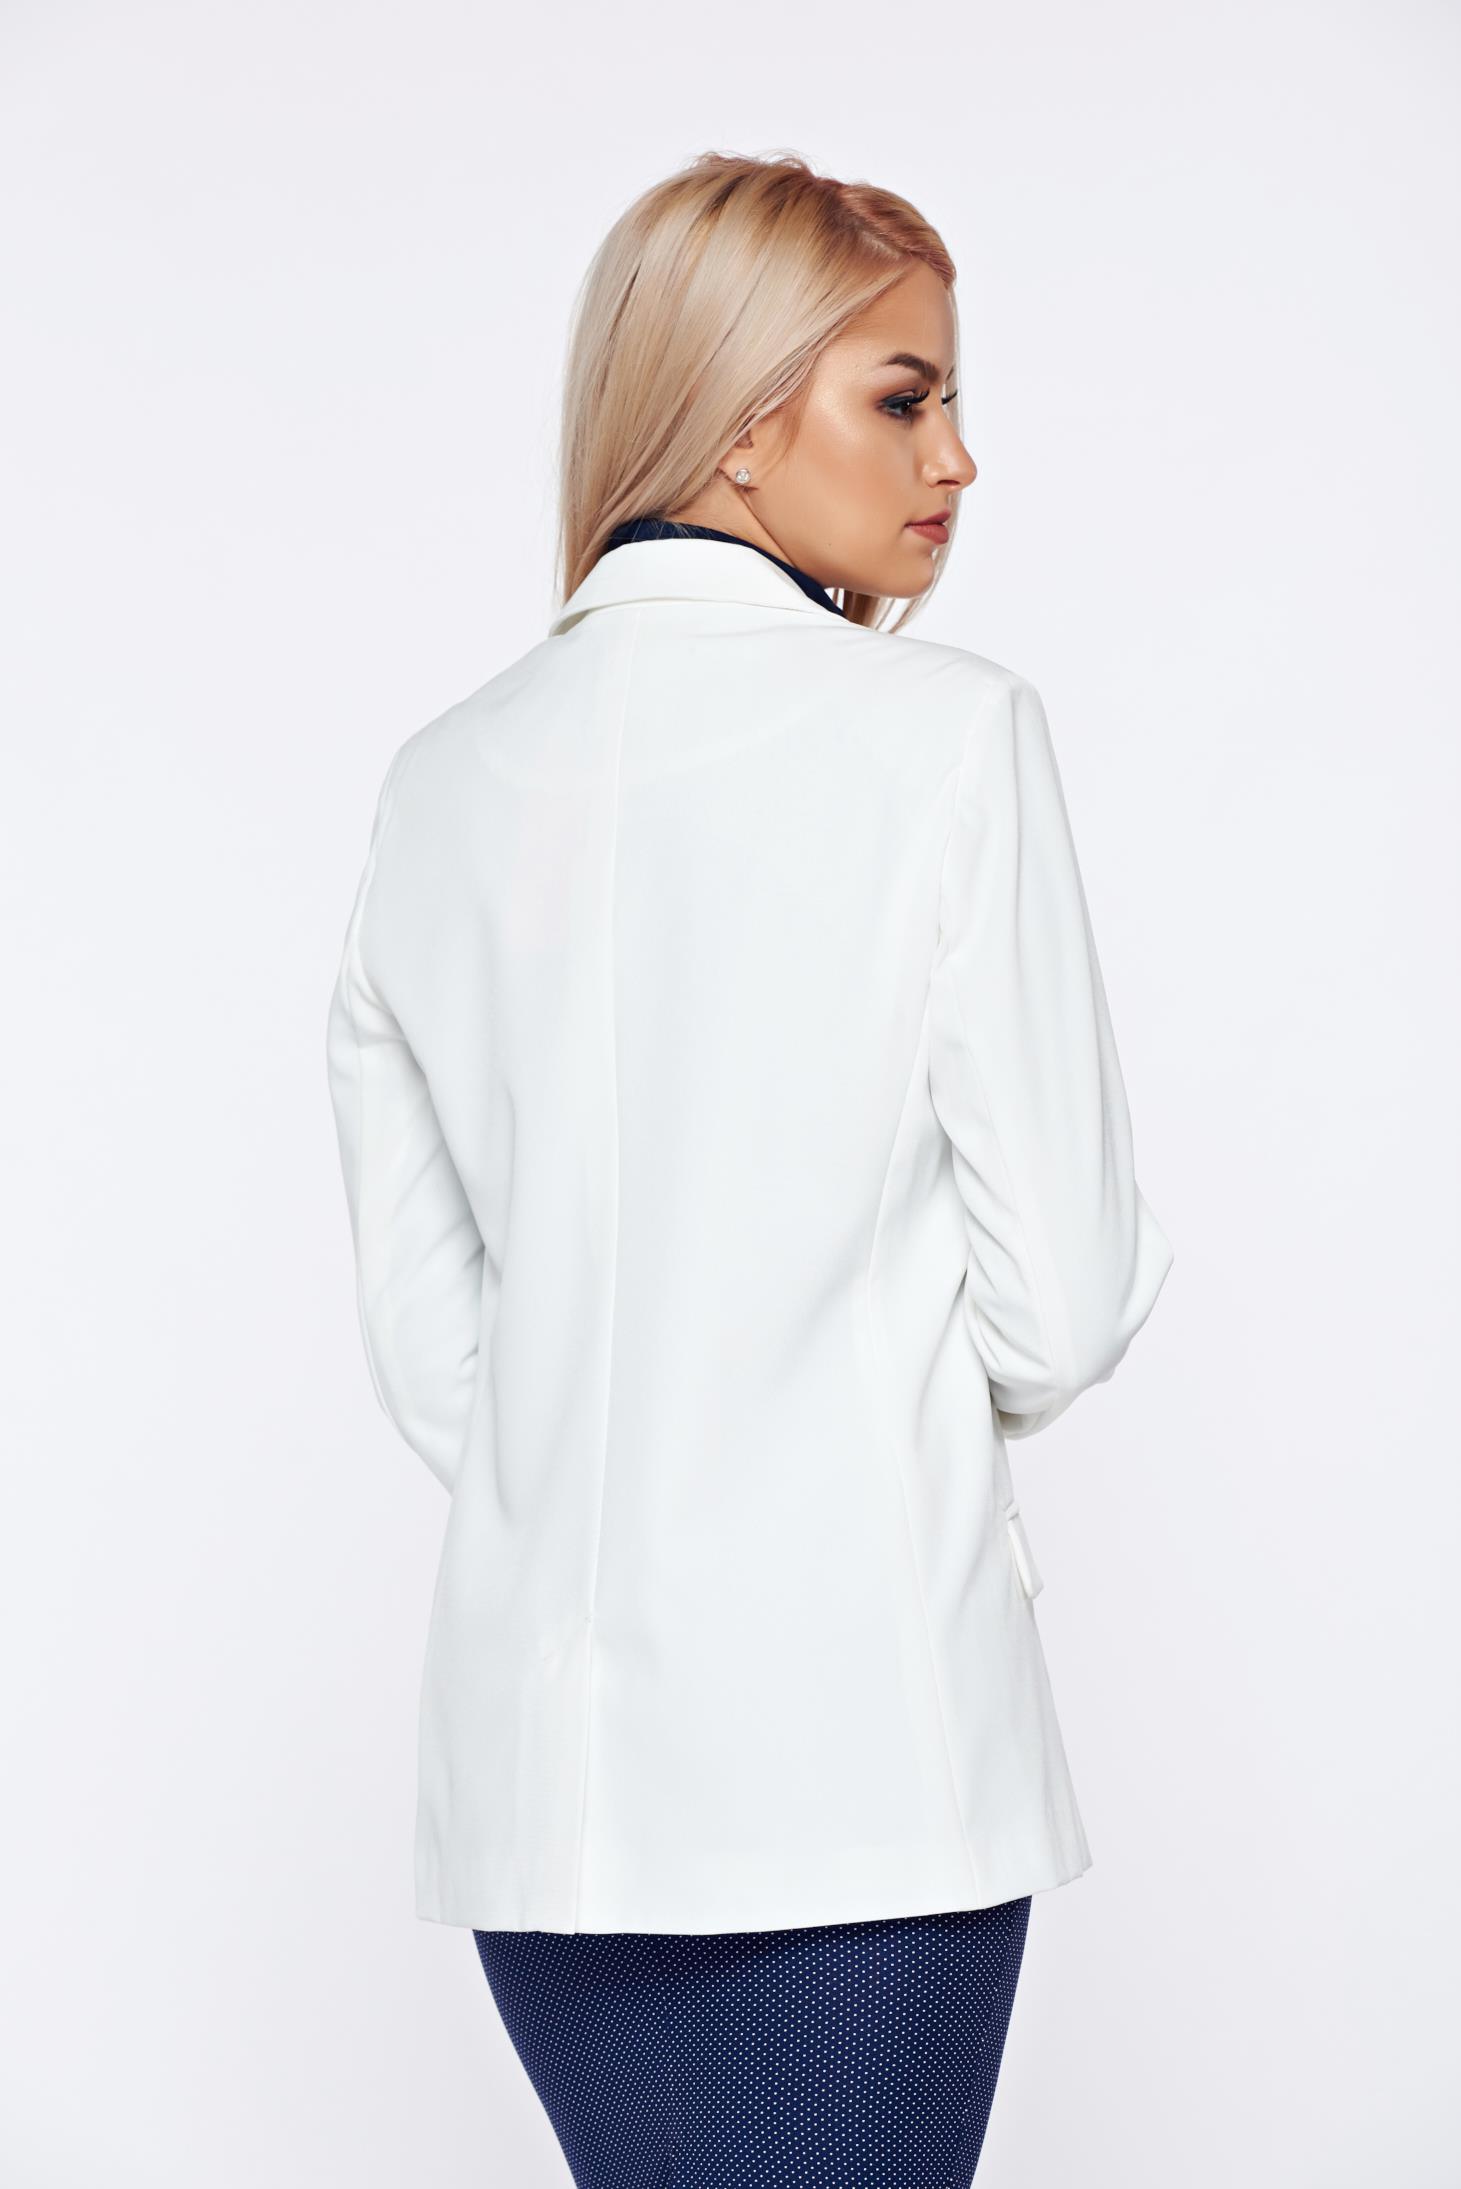 Top Secret white tented jacket with long sleeve